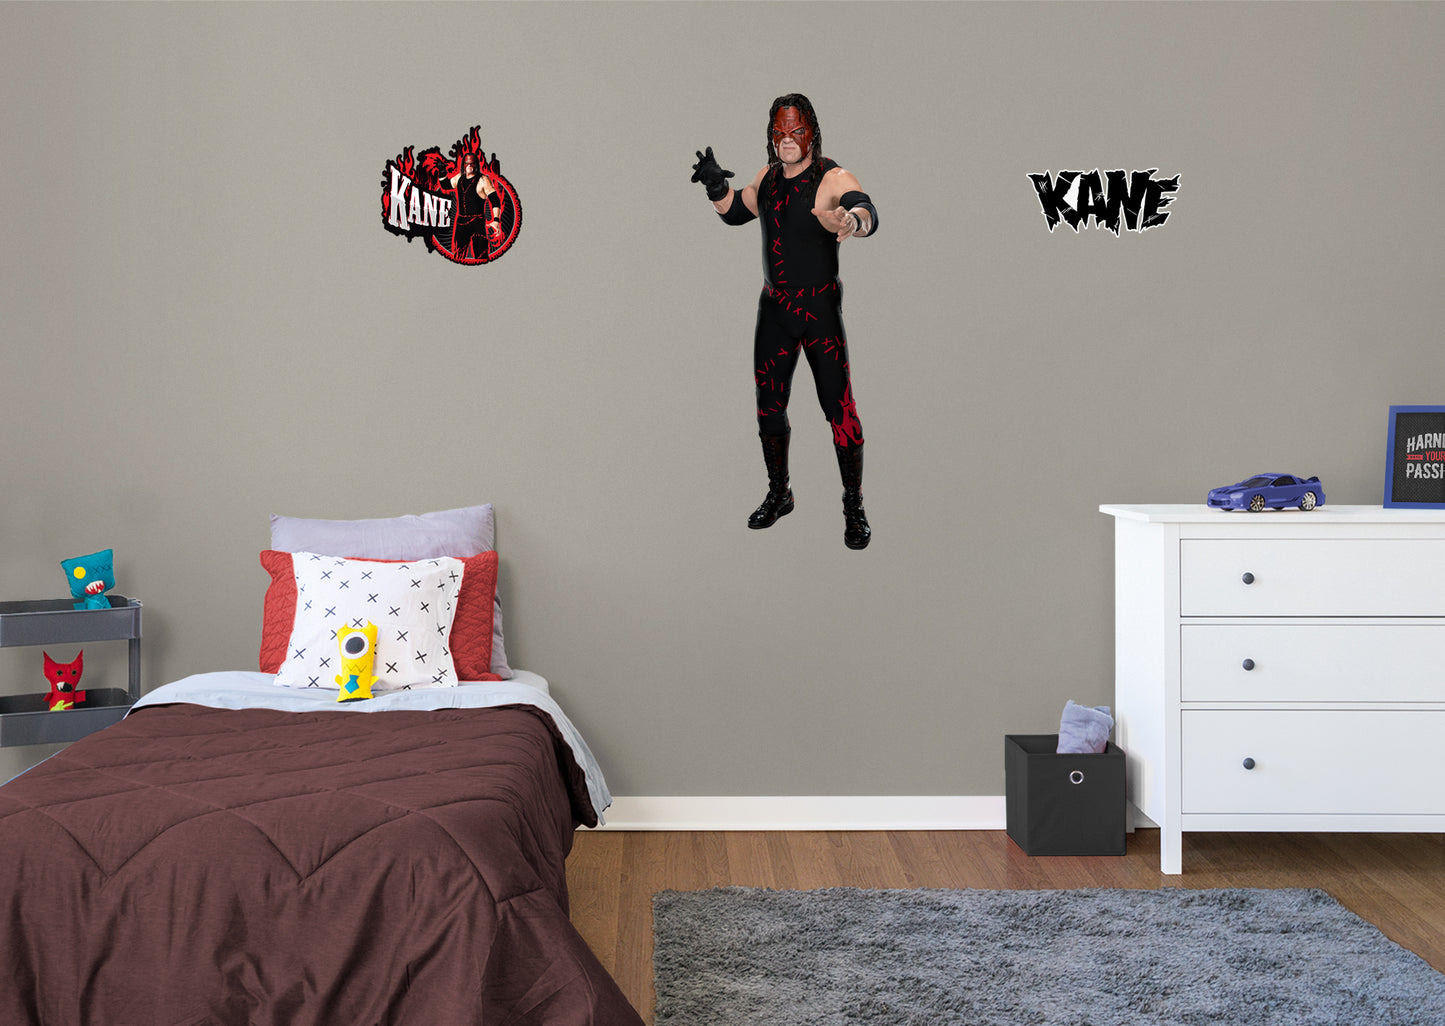 Kane 2021        - Officially Licensed WWE Removable Wall   Adhesive Decal